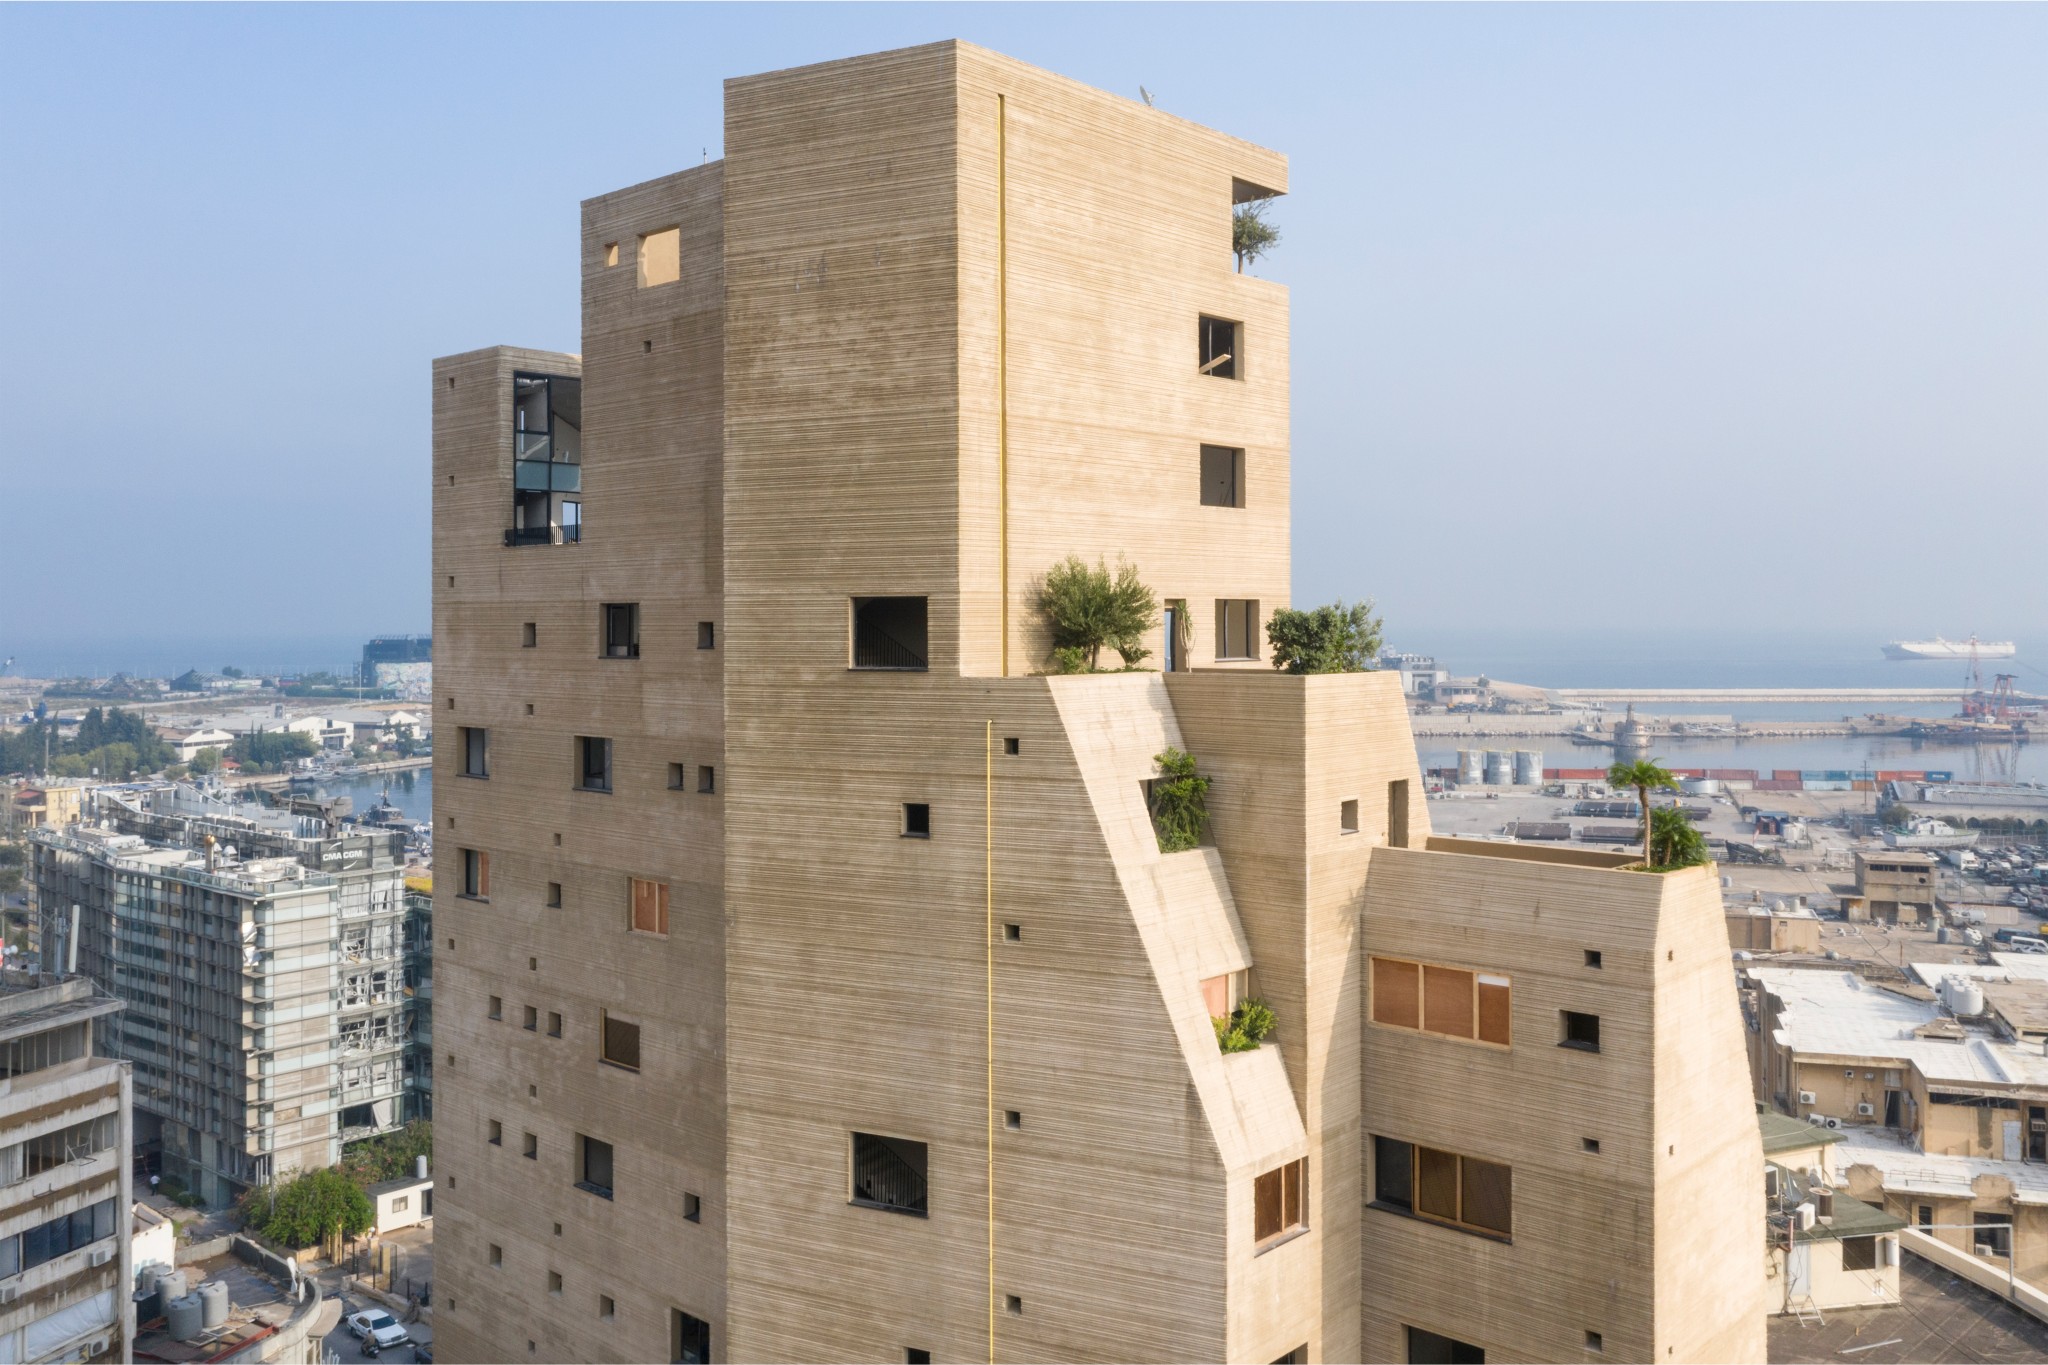 Stone Garden — Mina Image Center and Housing by Lina Ghotmeh — Architecture